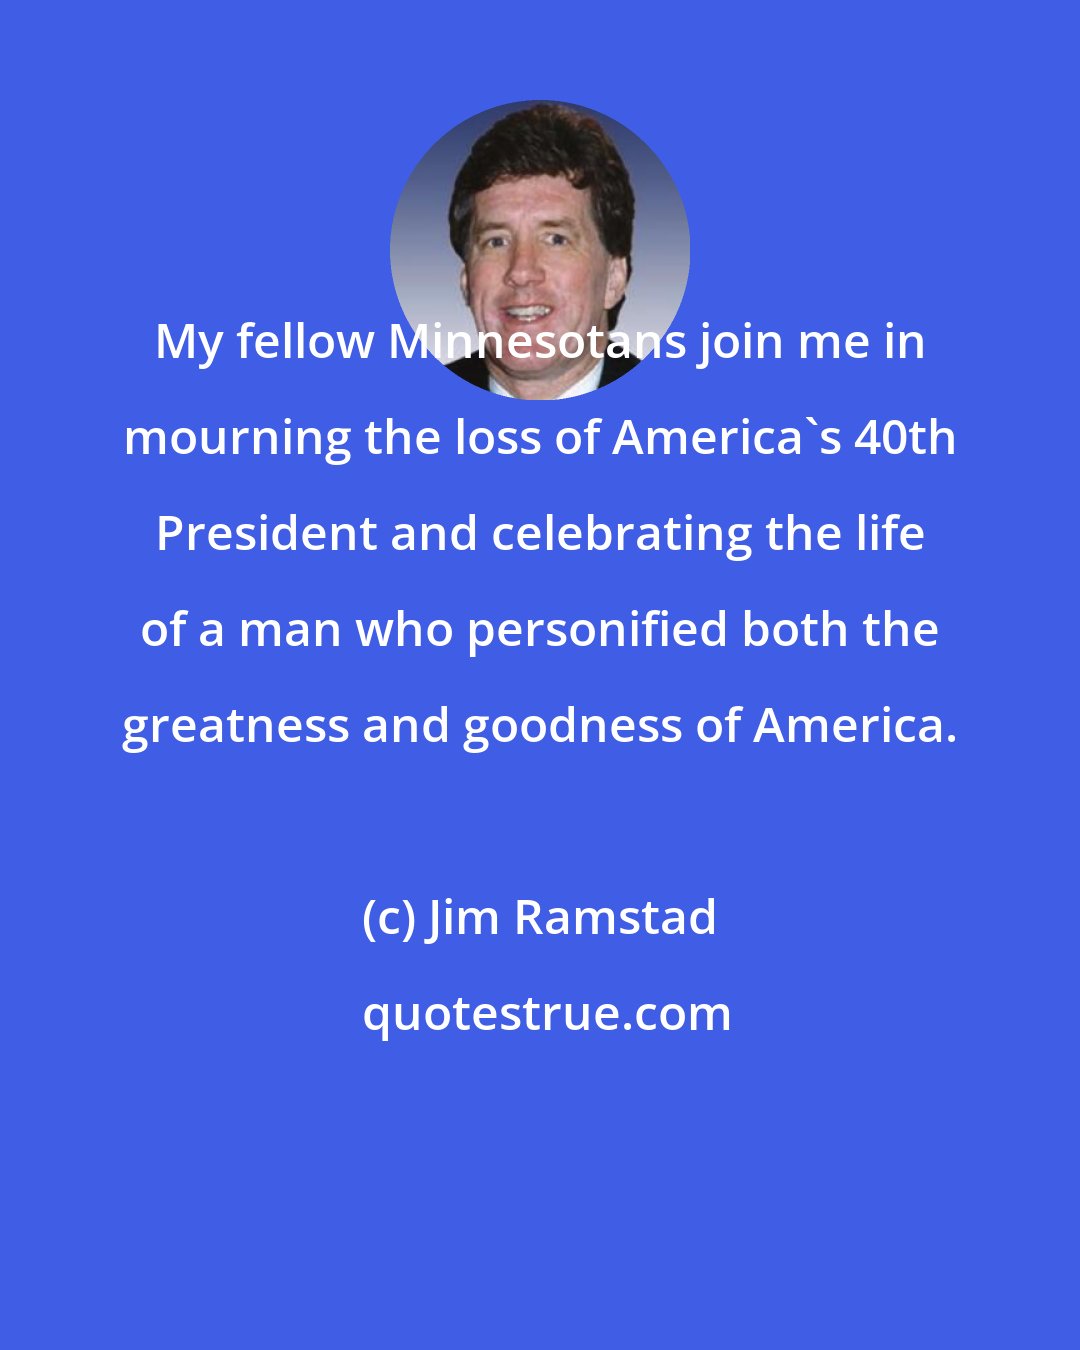 Jim Ramstad: My fellow Minnesotans join me in mourning the loss of America's 40th President and celebrating the life of a man who personified both the greatness and goodness of America.